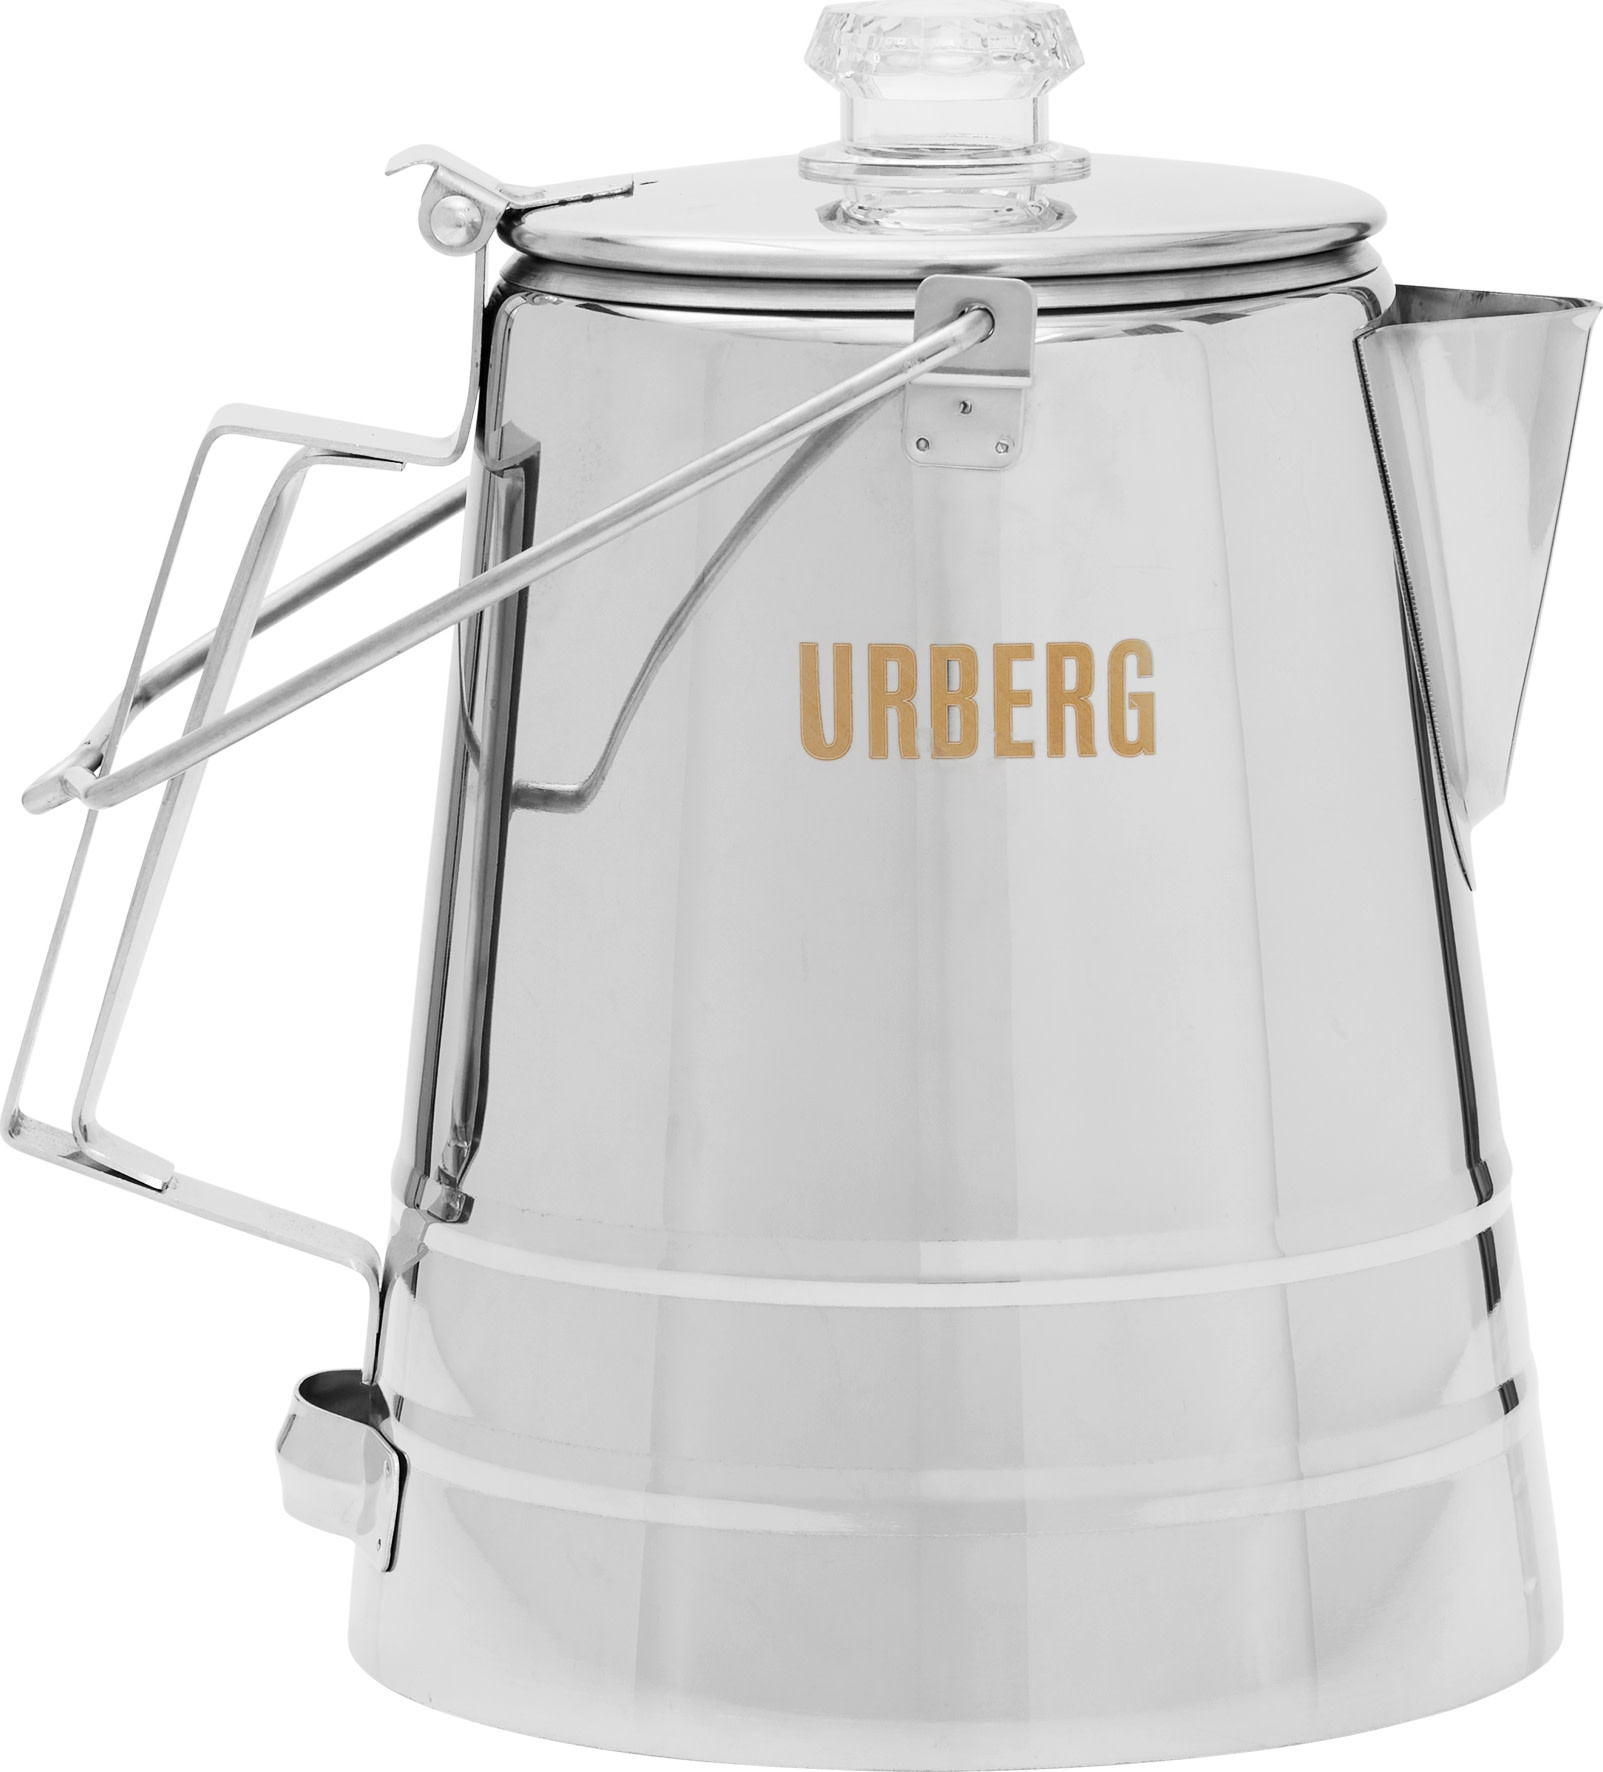 Urberg Rogen Percolator 14 cups Stainless One Size, Stainless